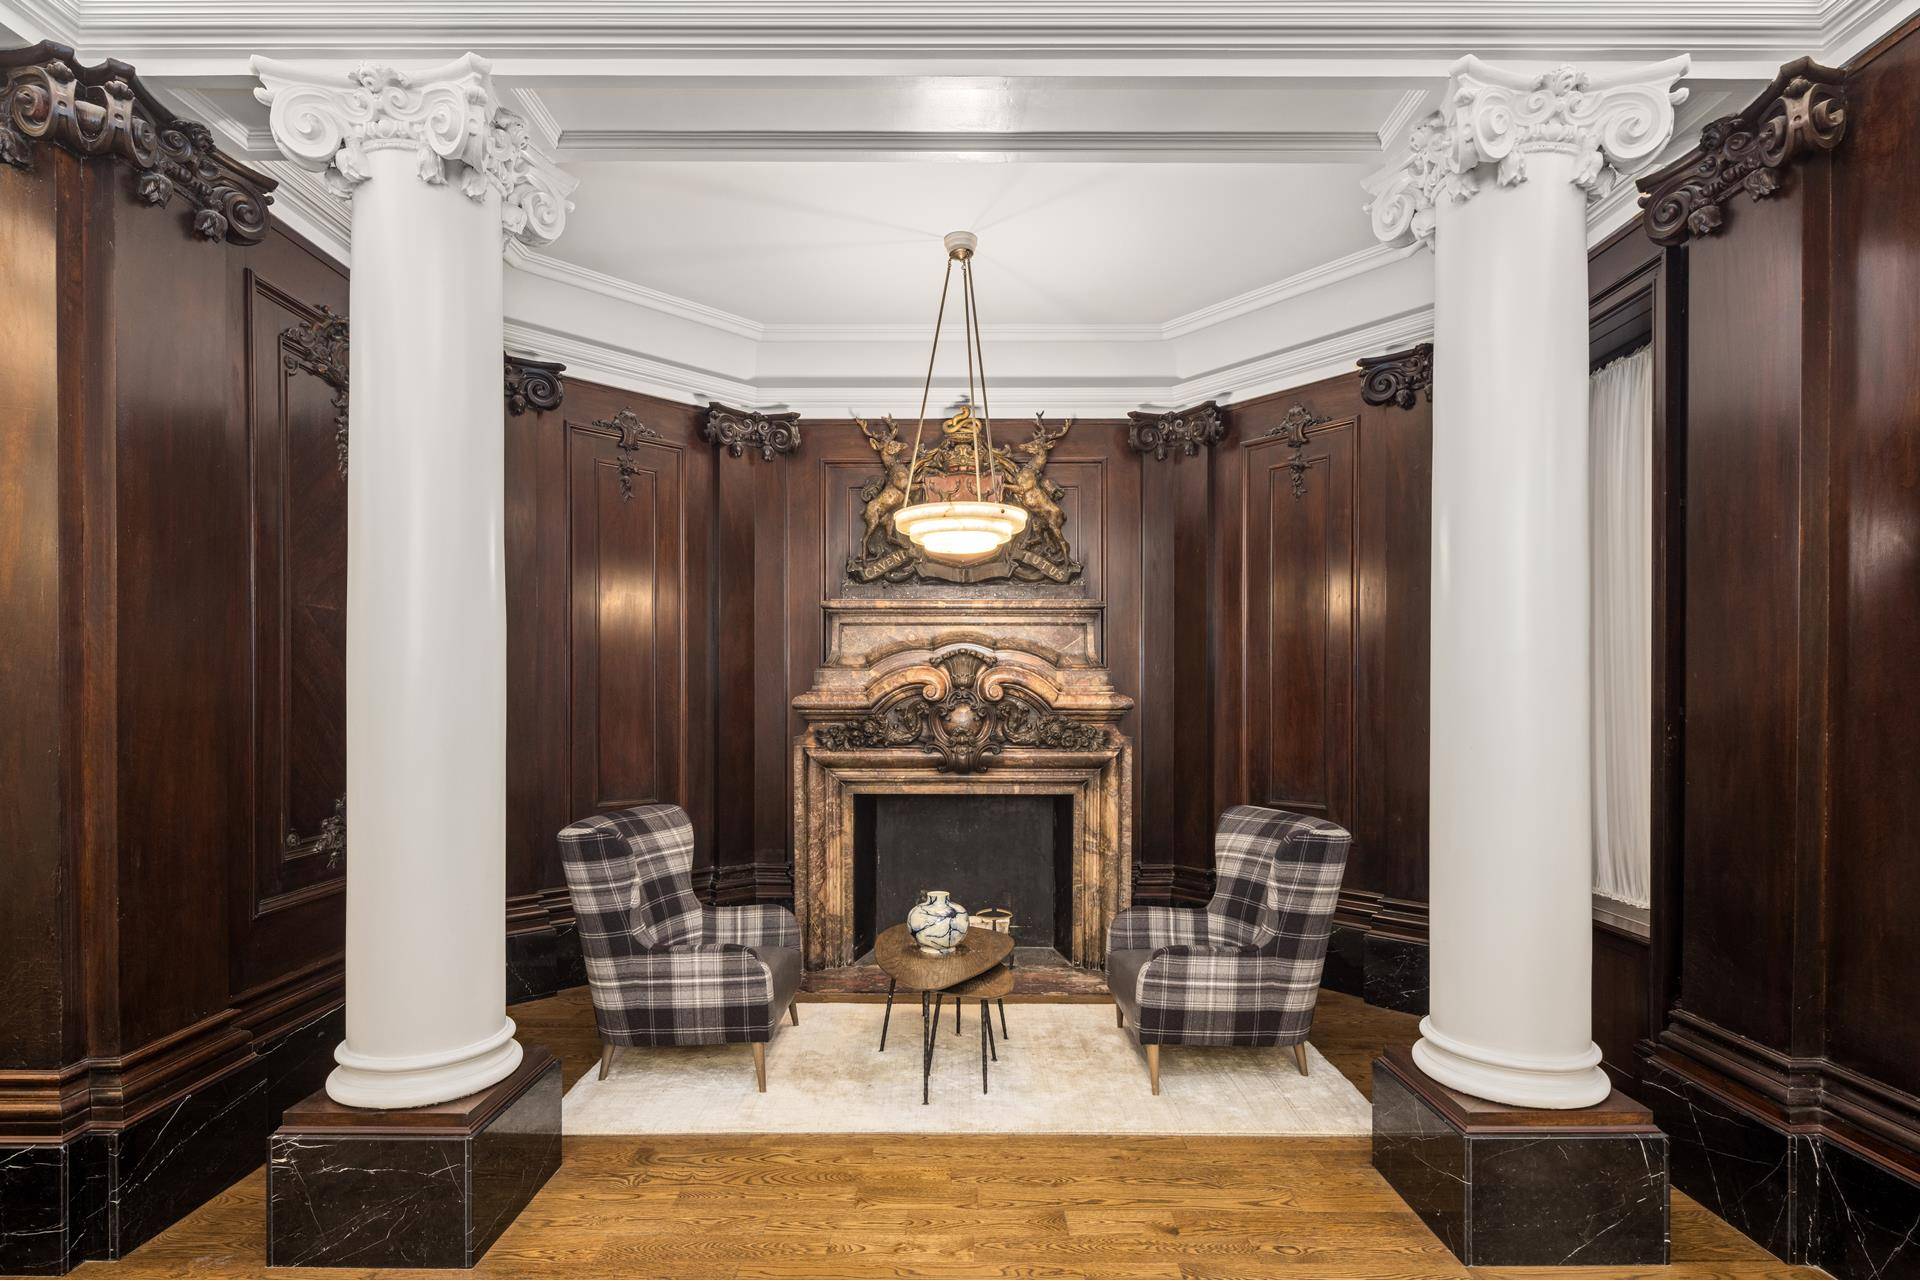 This split two bedroom, two bathroom residence is located in the amenity filled Chatsworth, a renovated and upgraded Prewar gem in Manhattan's coveted Upper West Side neighborhood.